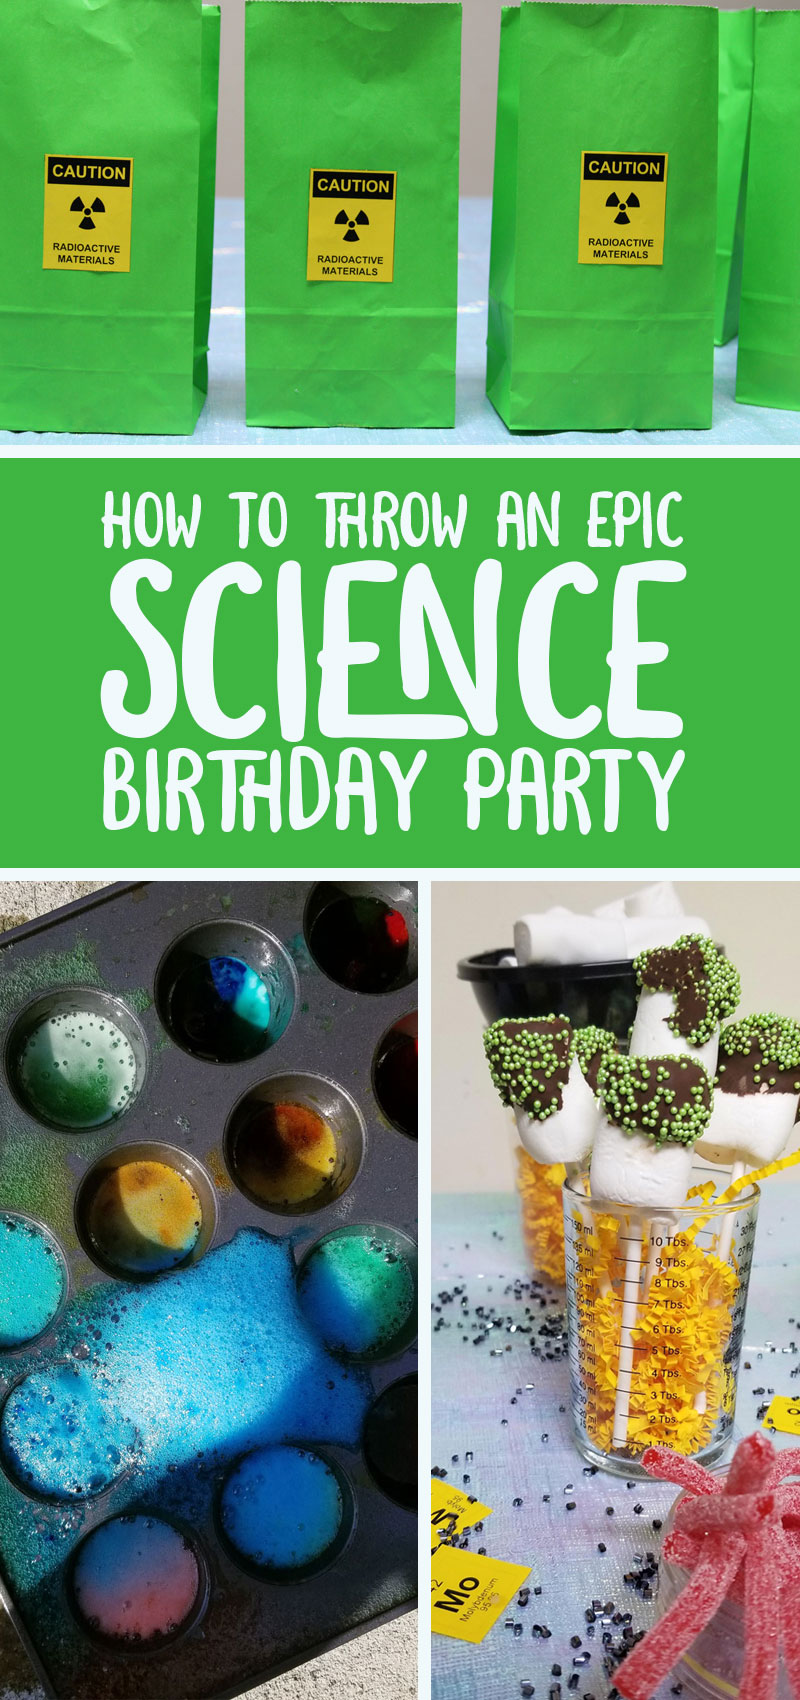 science birthday party for kids ideas three image collage with text on a green background